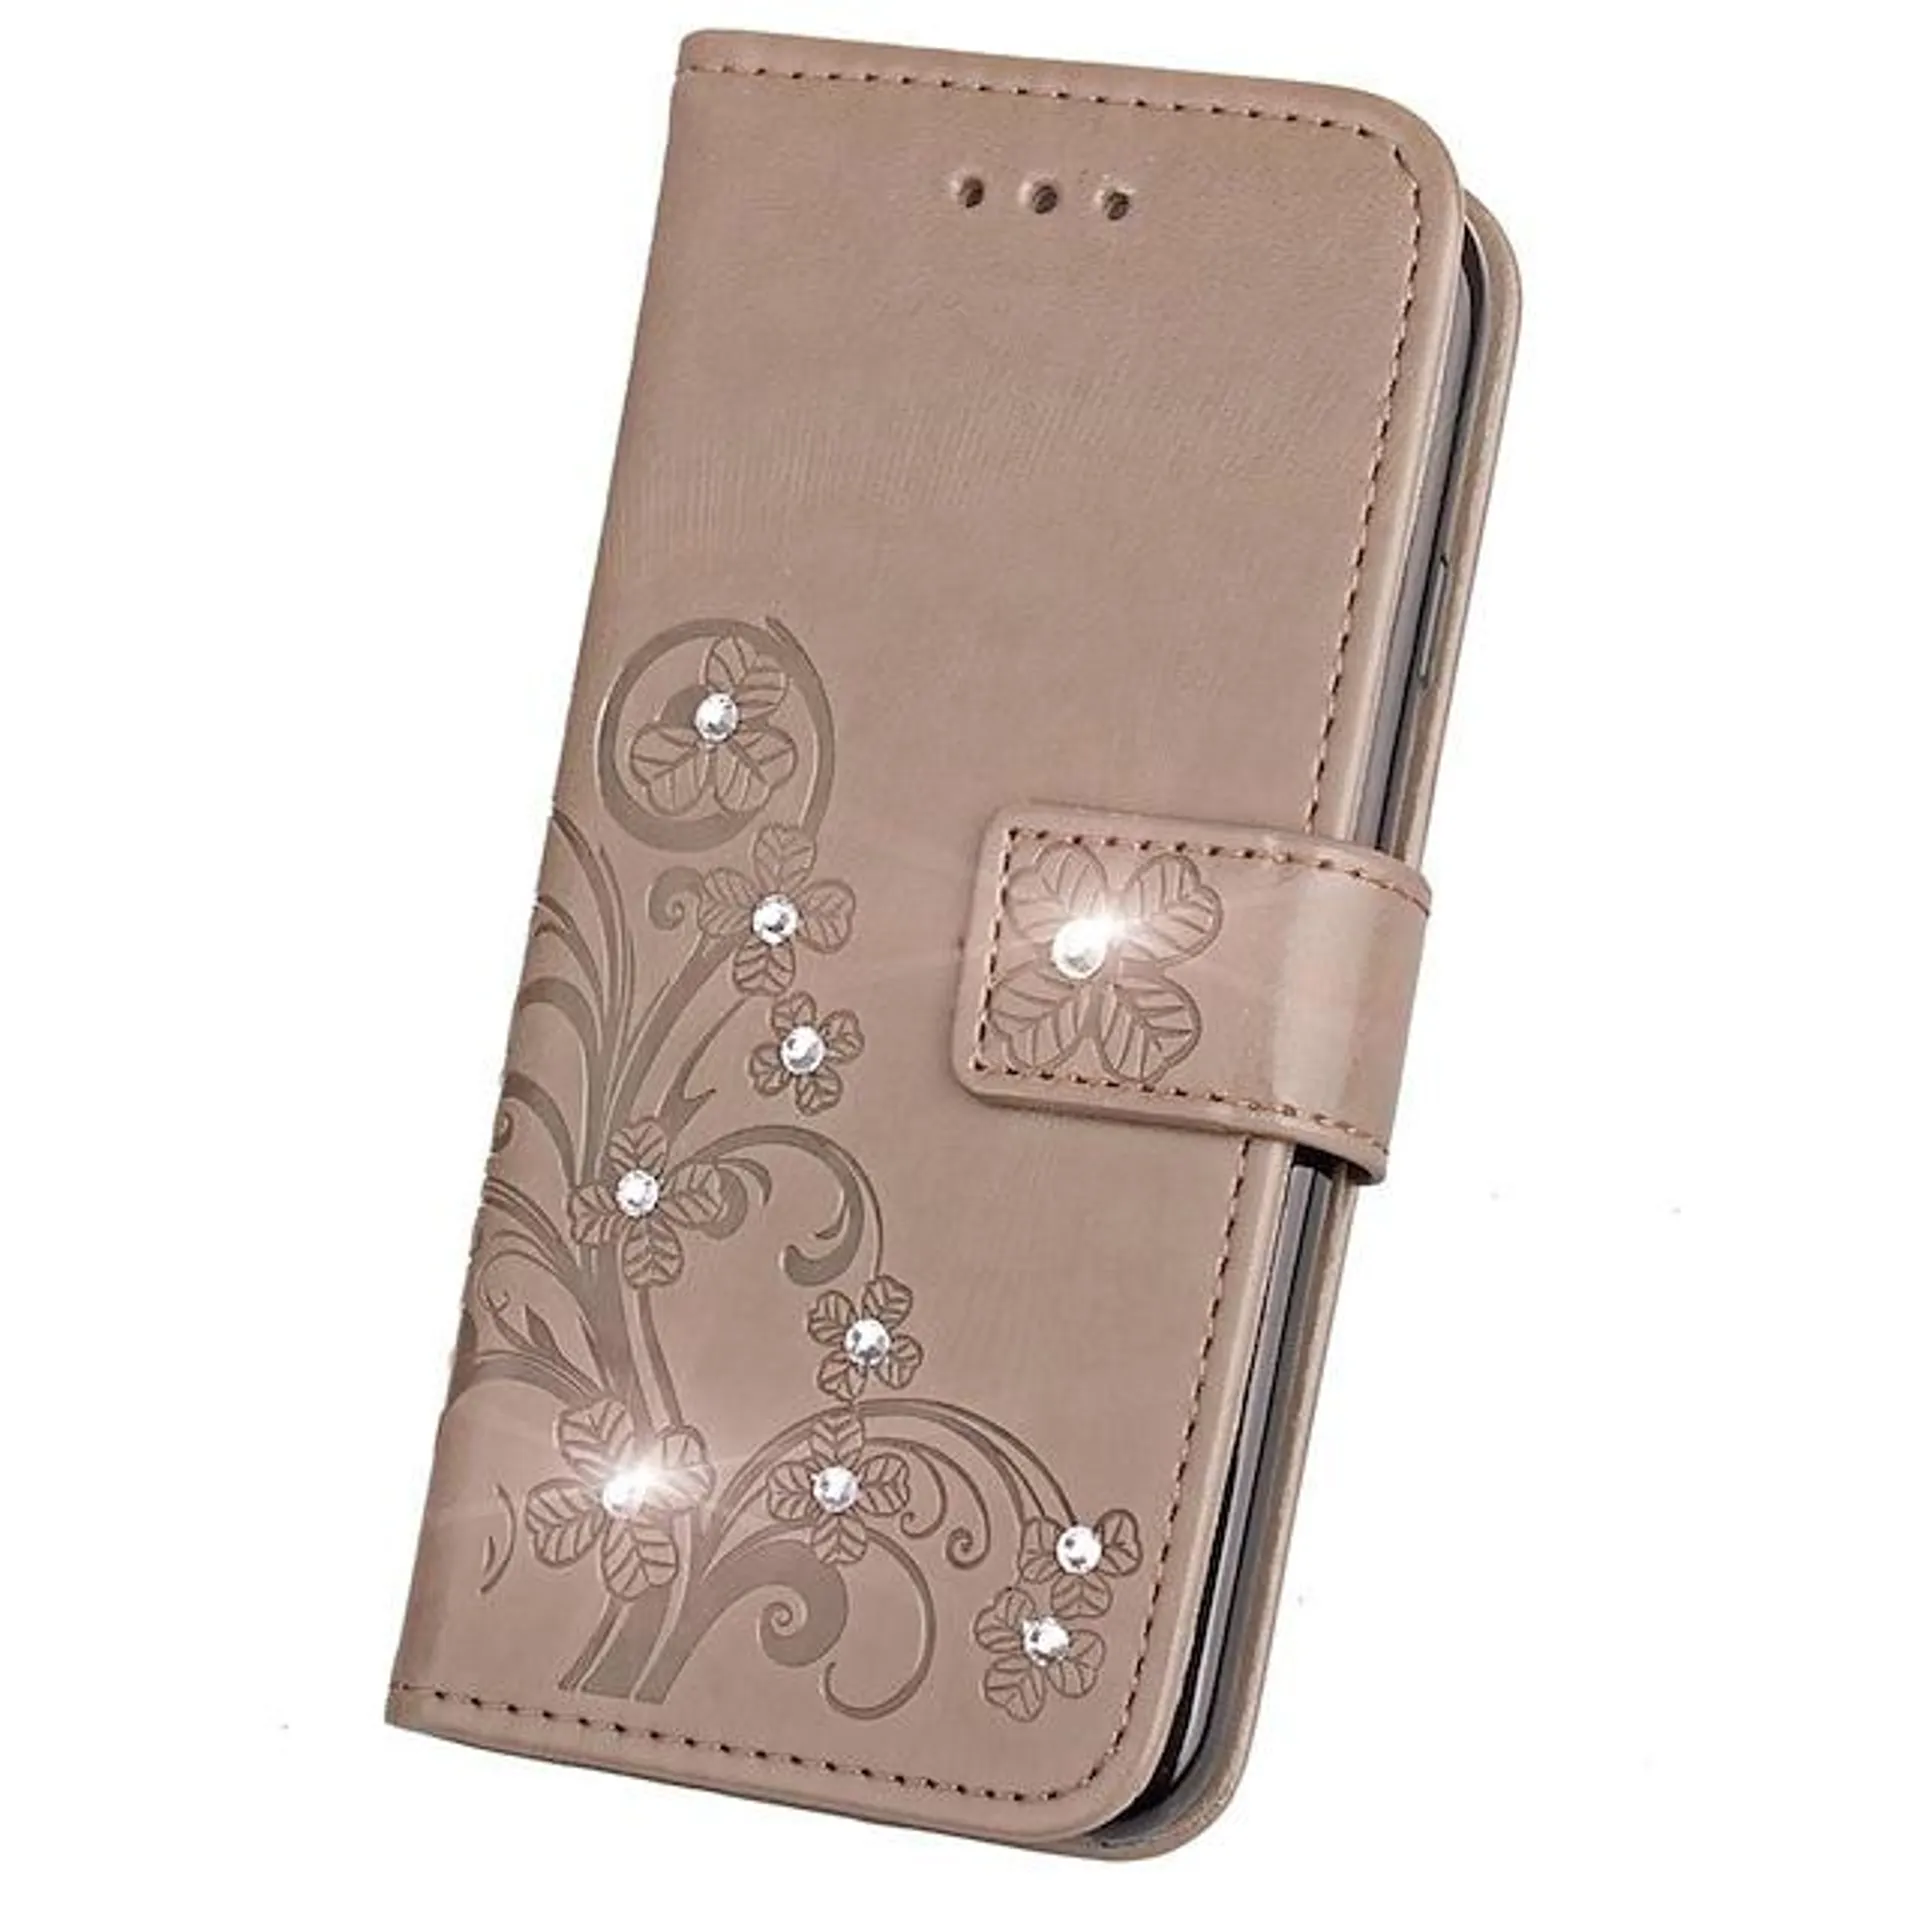 Phone Case For Samsung Galaxy Full Body Case A3 A5 A7(2017) A5(2016) A3(2016) Wallet Card Holder Rhinestone Solid Colored Hard PU Leather